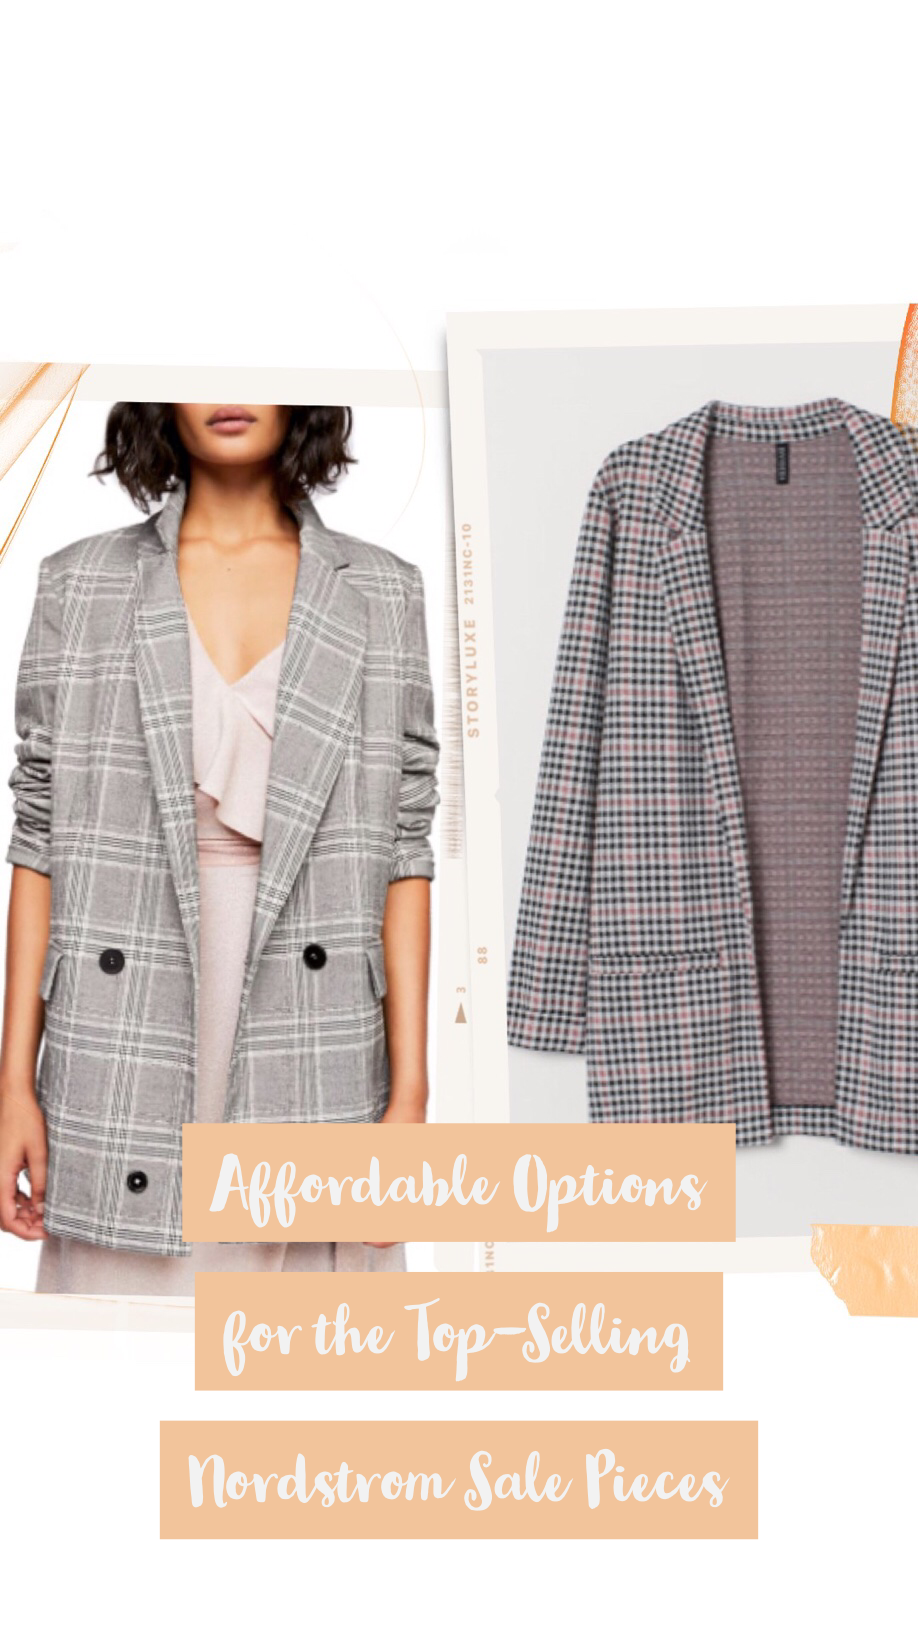 Affordable Options For The Top-Selling Nordstrom Sale Pieces